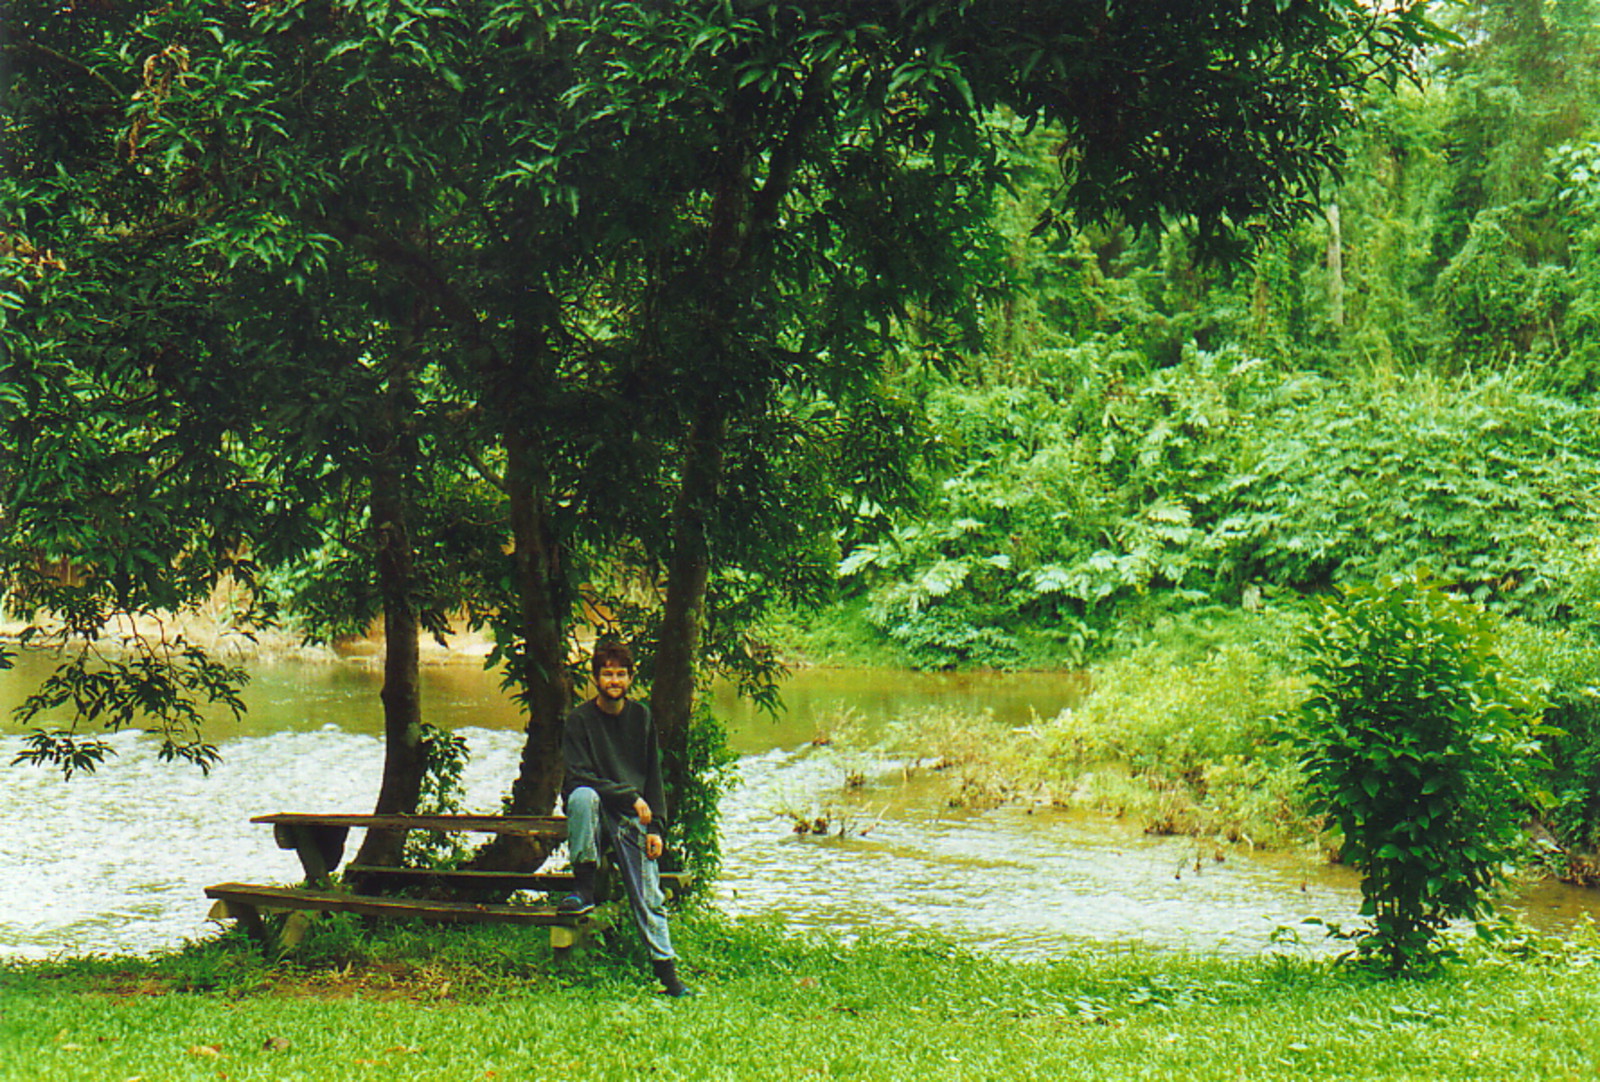 Mark relaxing by the river, six days from civilisation